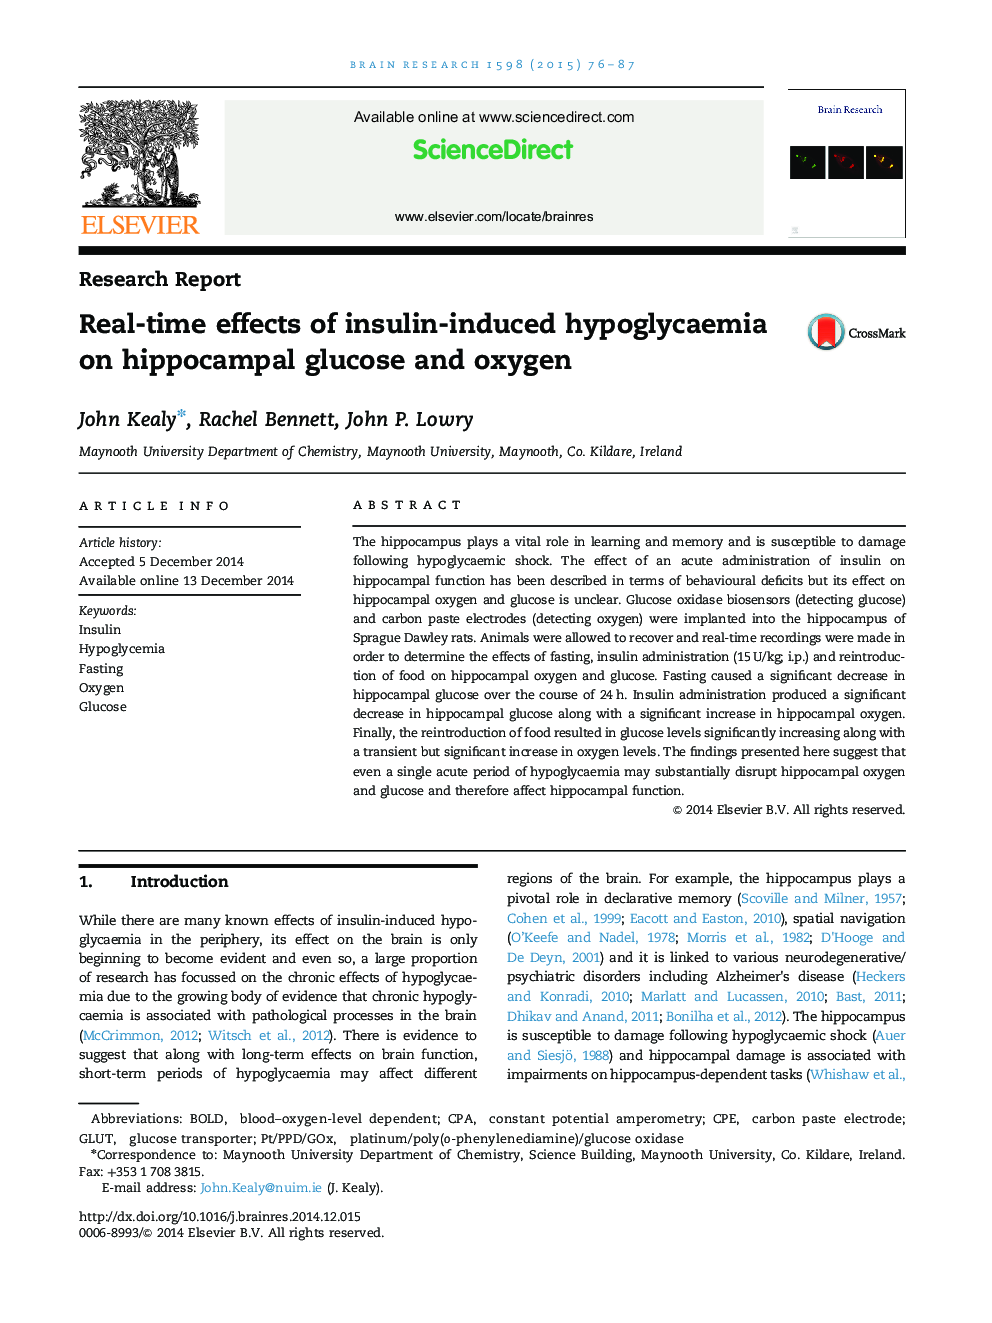 Real-time effects of insulin-induced hypoglycaemia on hippocampal glucose and oxygen